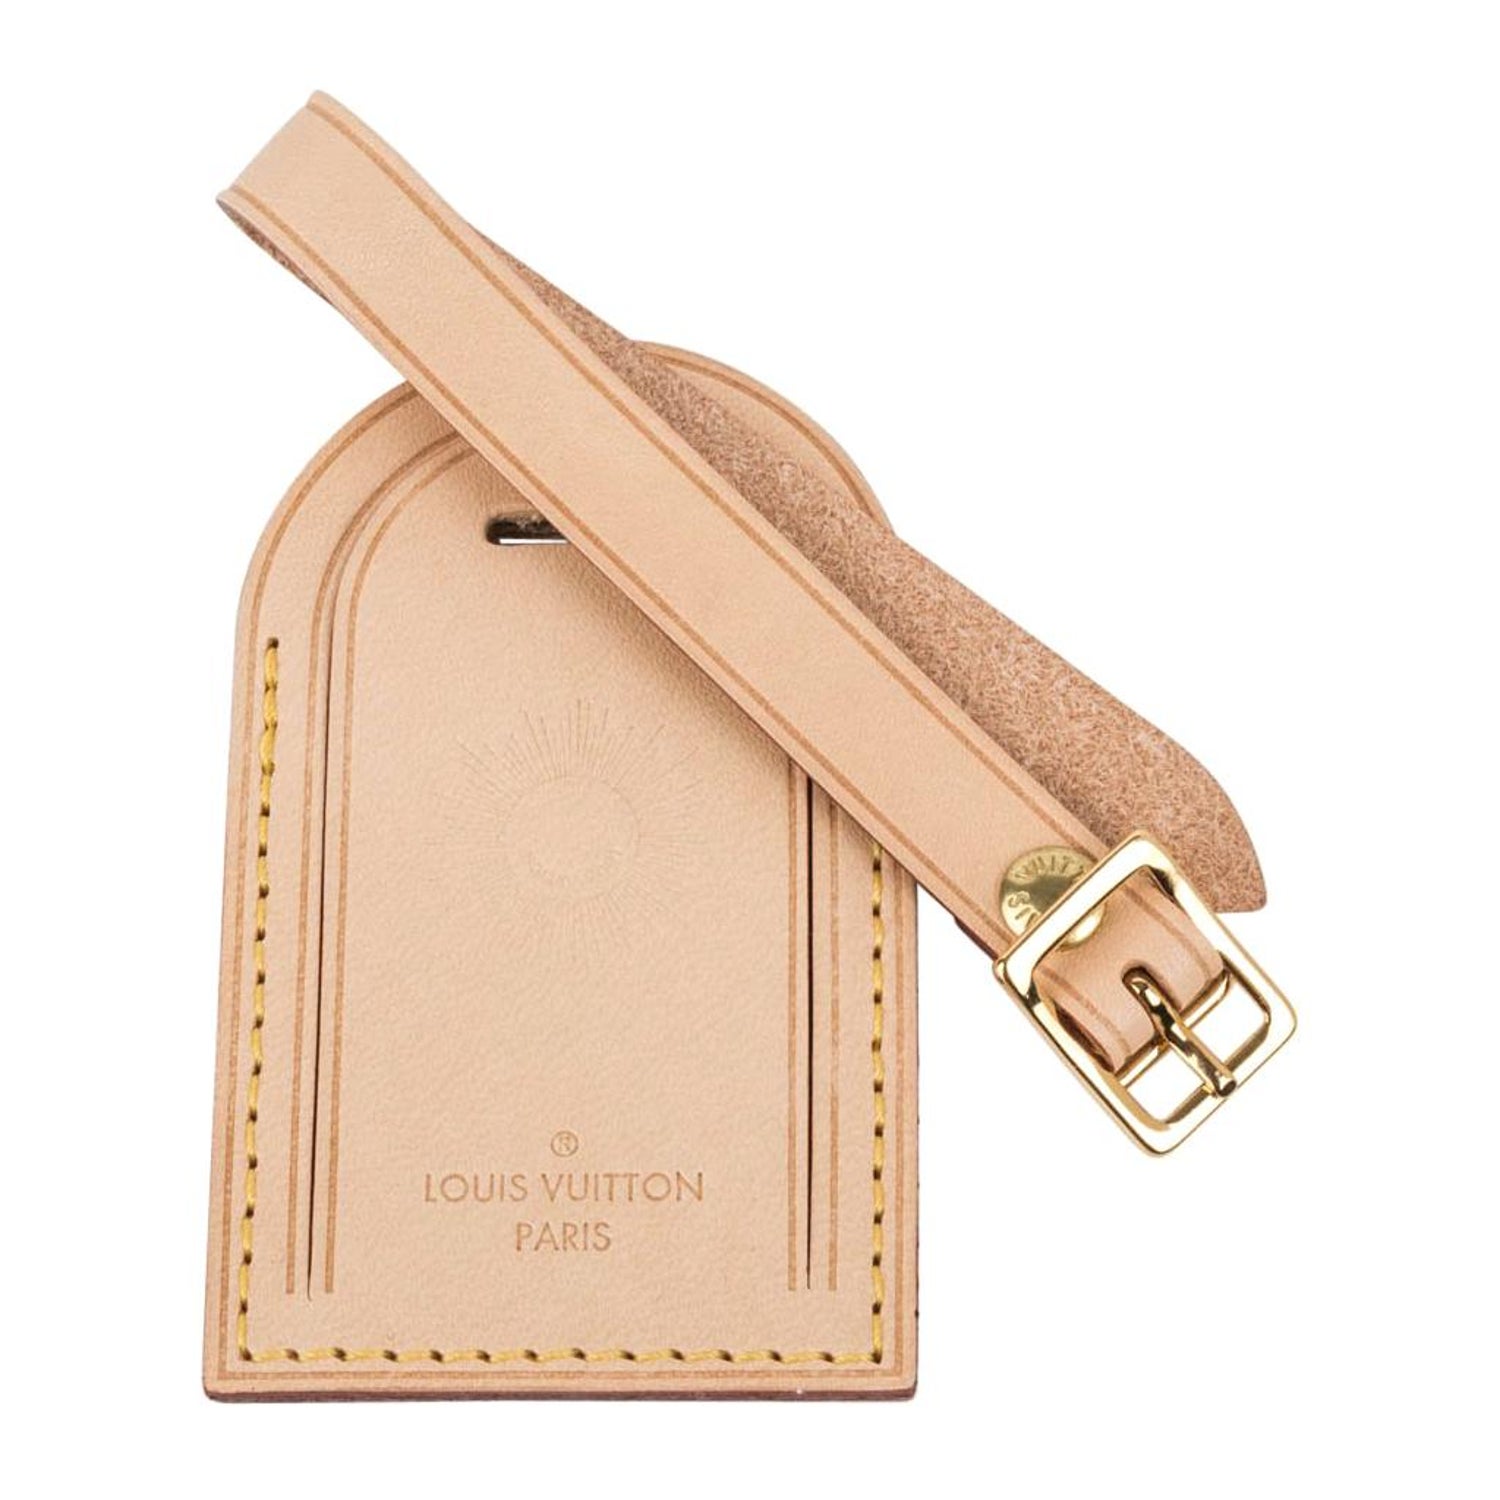 Louis Vuitton Luggage Tag - 11 For Sale 1stDibs | lv luggage price, how much is a louis vuitton luggage tag, lv luggage tag